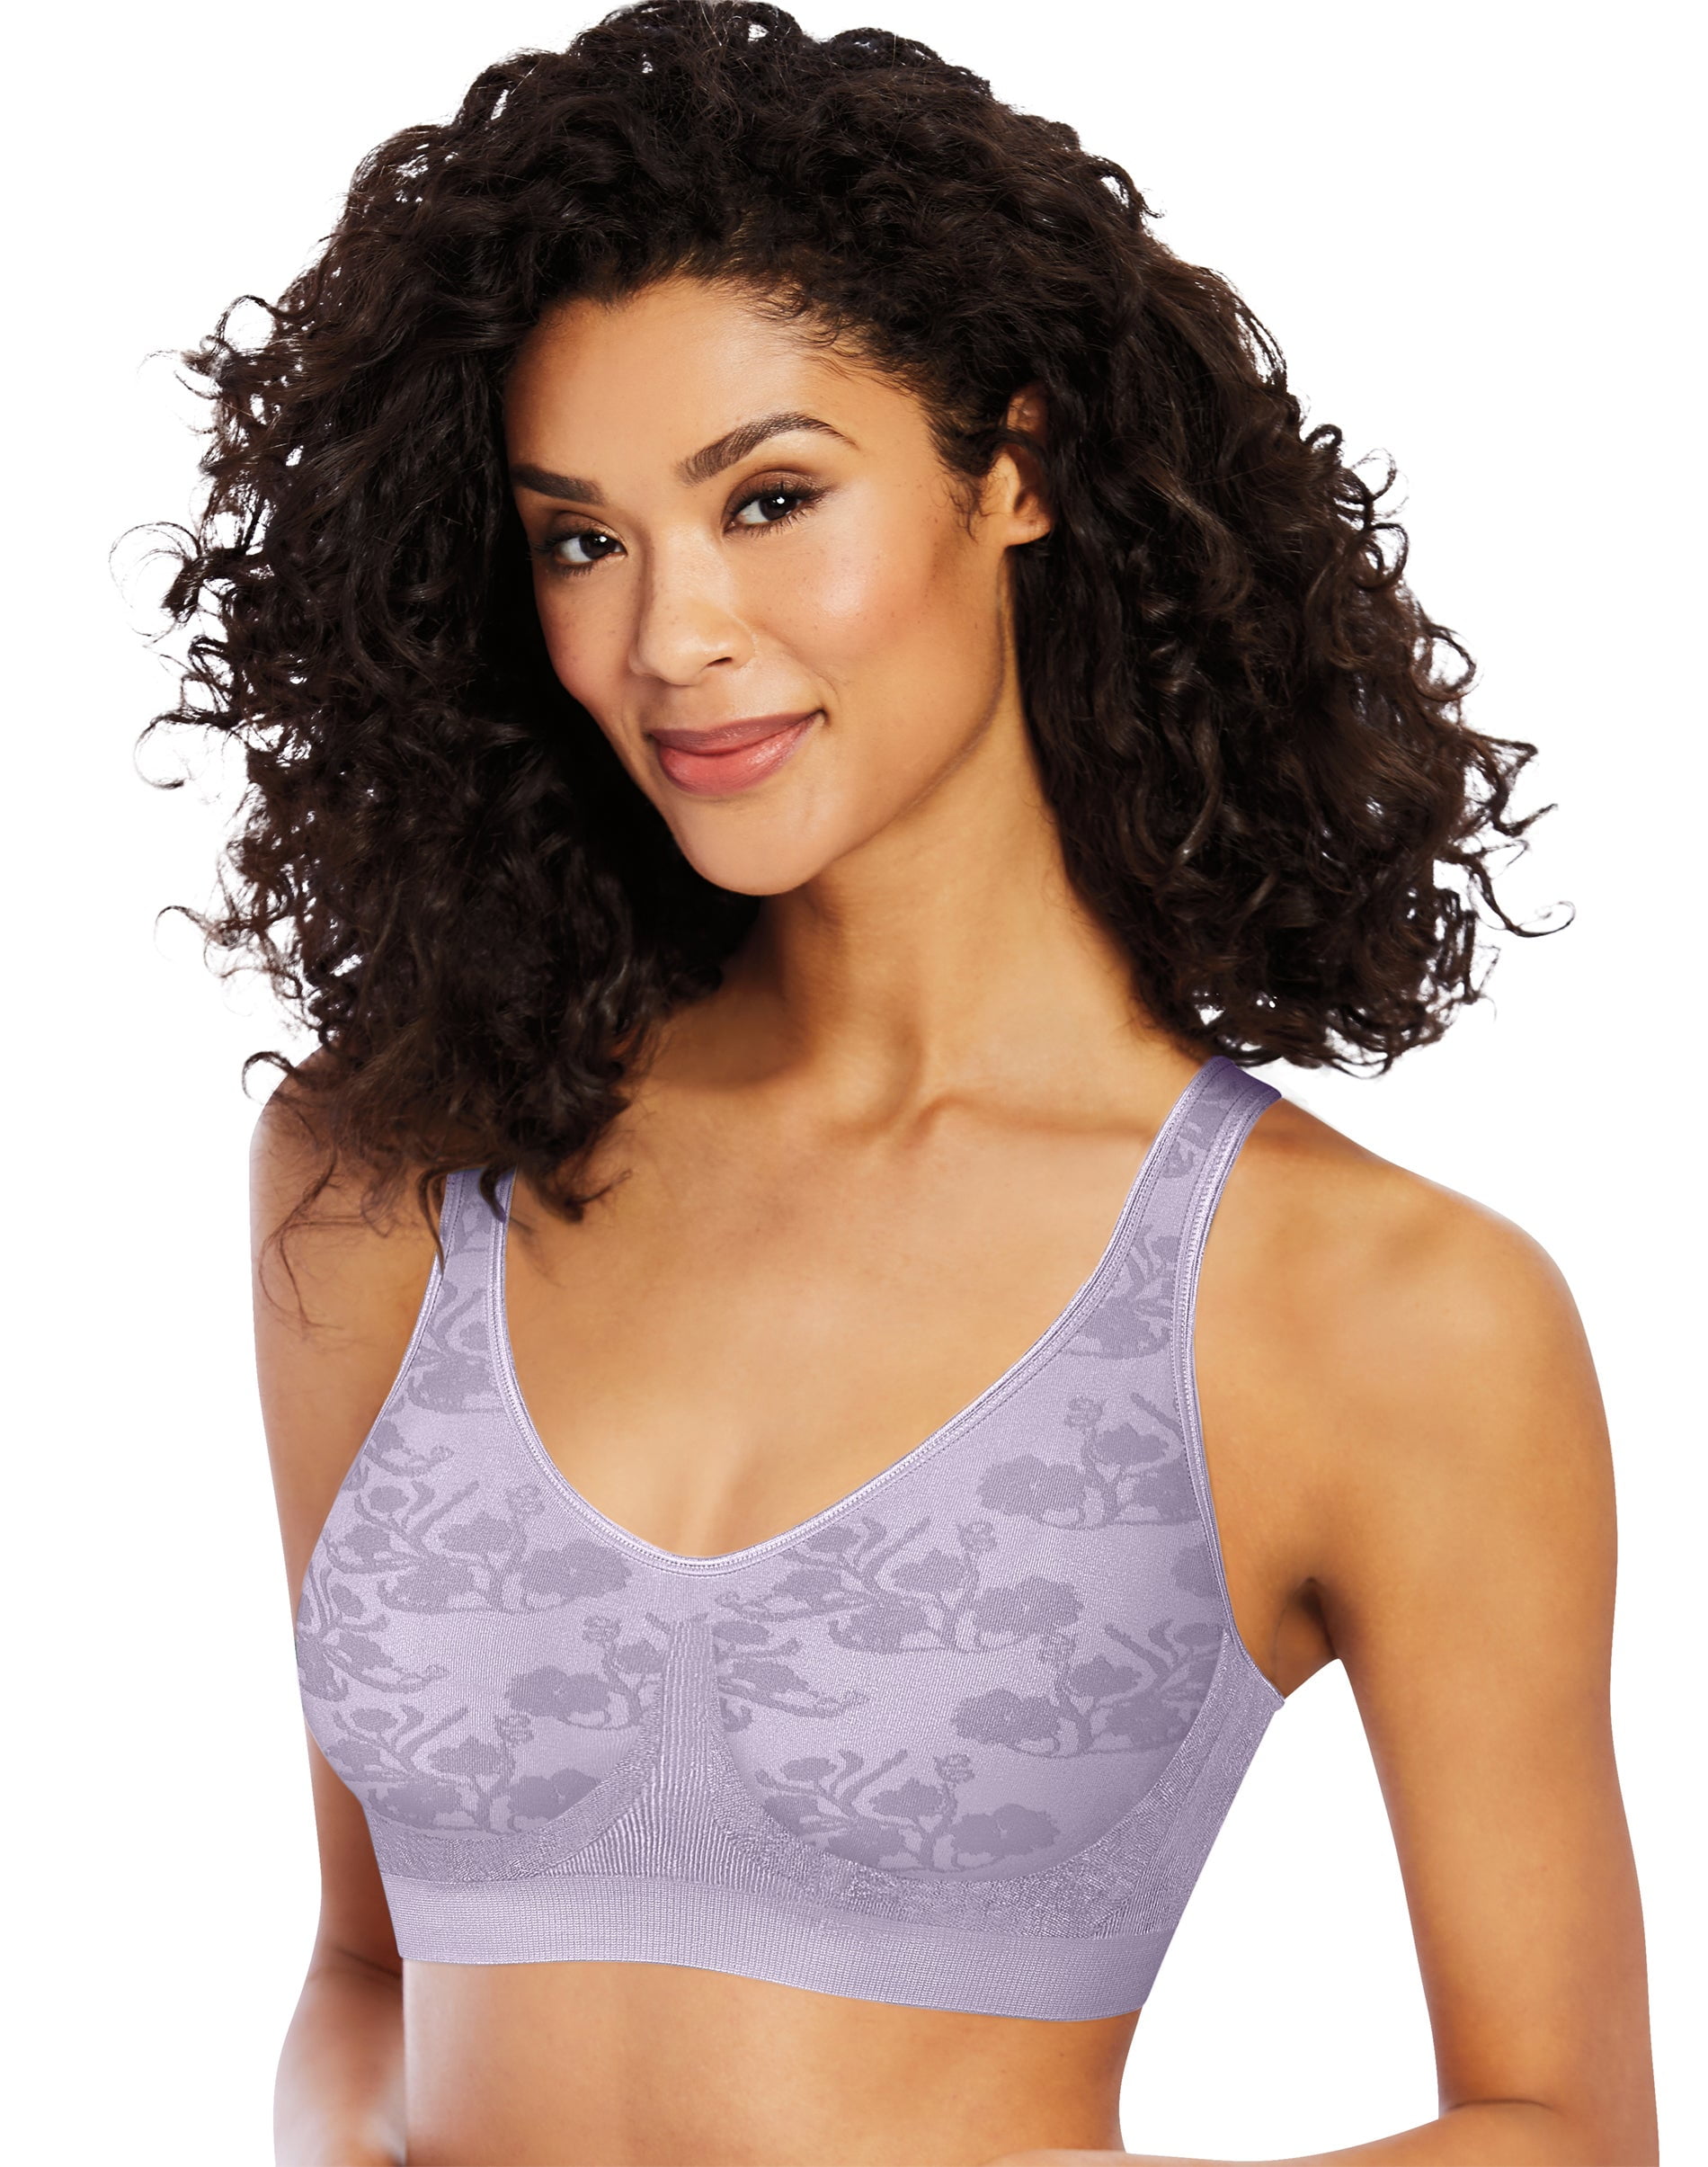 Shapermint - The ✨Bali® Comfort Revolution ComfortFlex Fit Shaping Wirefree  Bra✨ is the one that you can't wait to put on and not take off at the end  of the day. That's